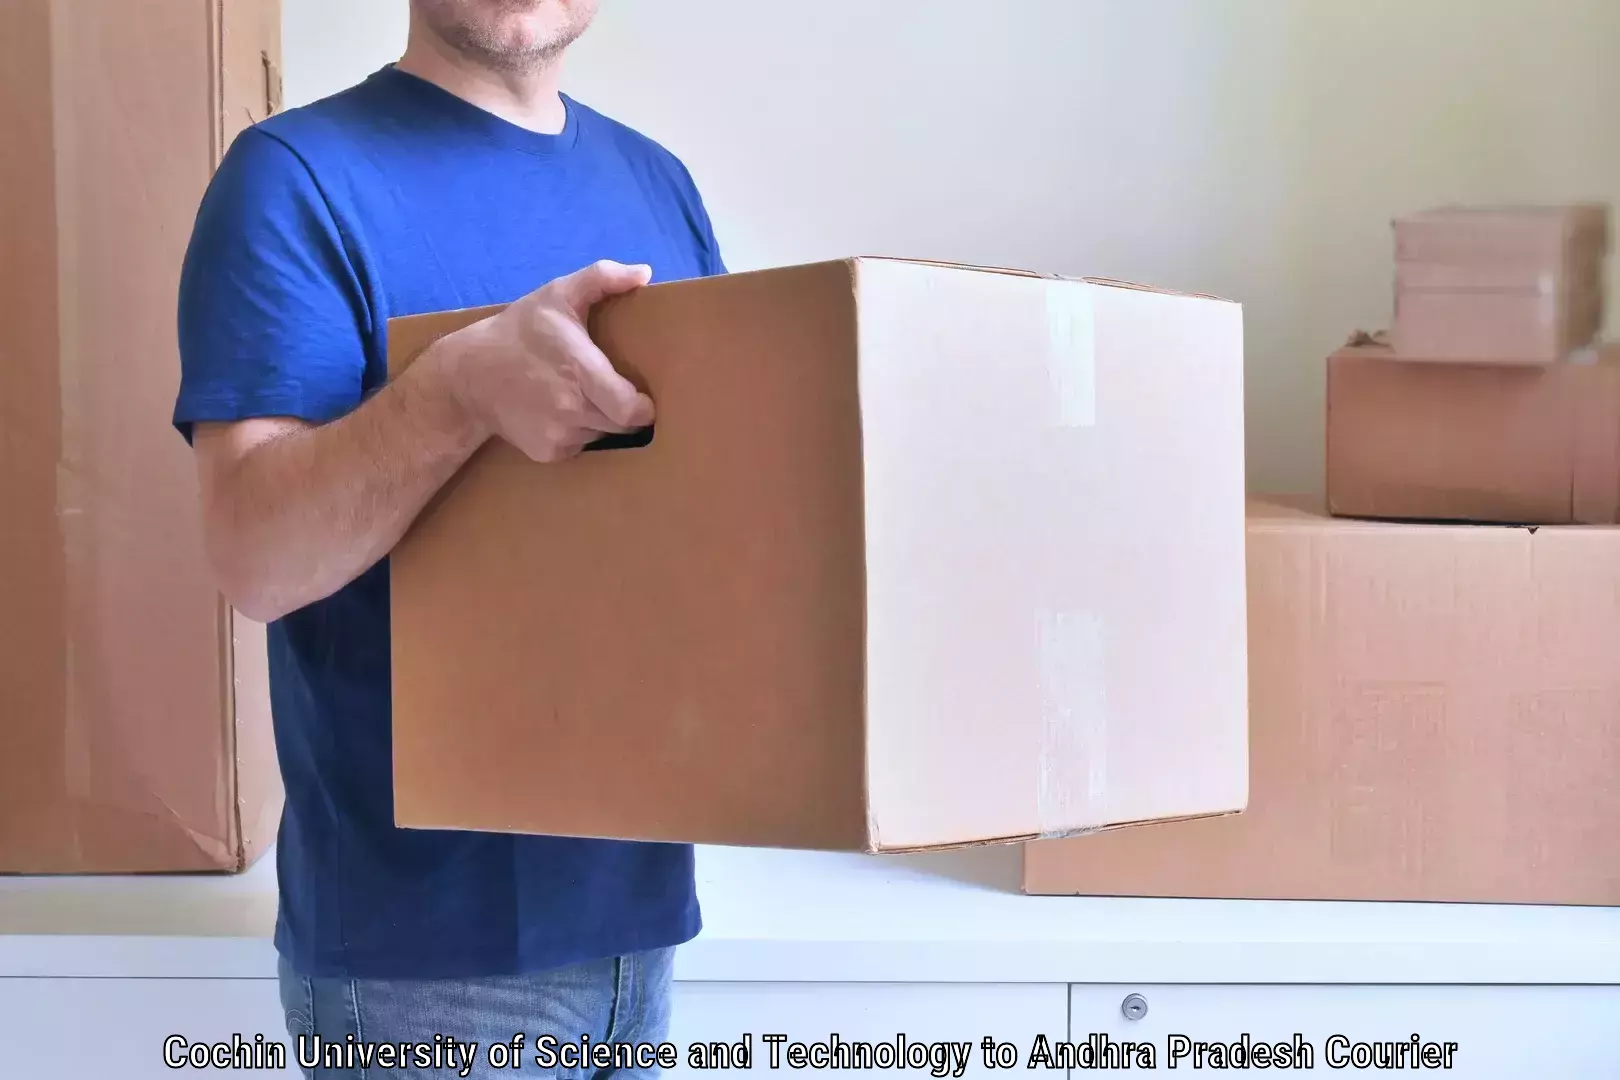 Advanced household moving services Cochin University of Science and Technology to Andhra Pradesh